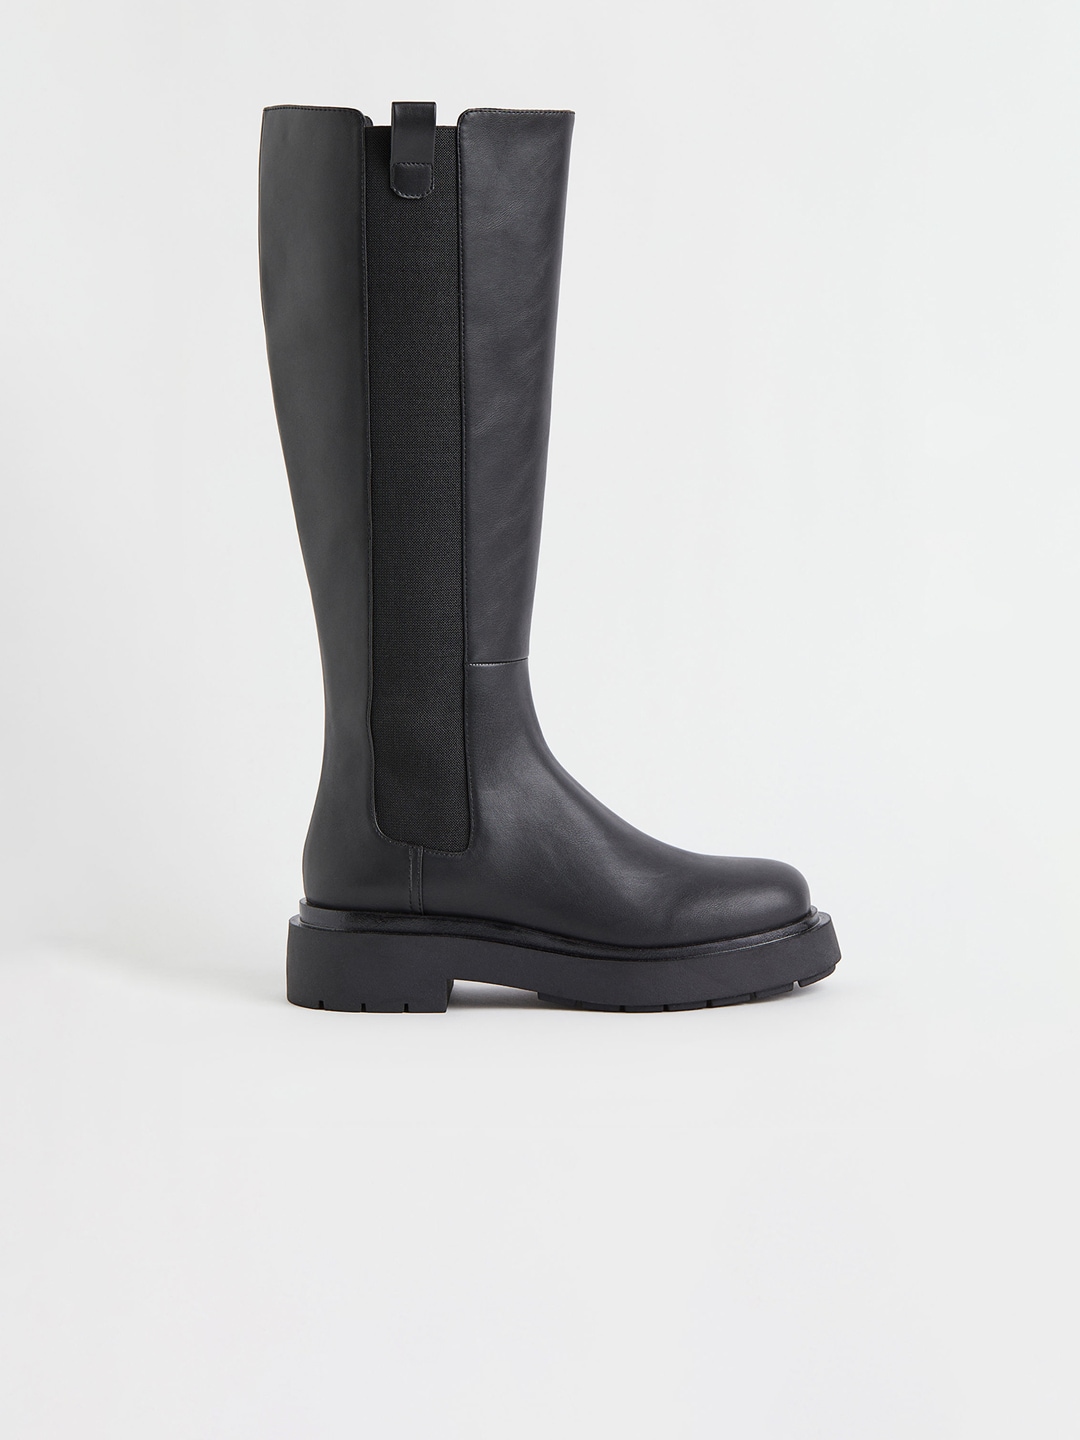 H&M Women Black Boots Price in India